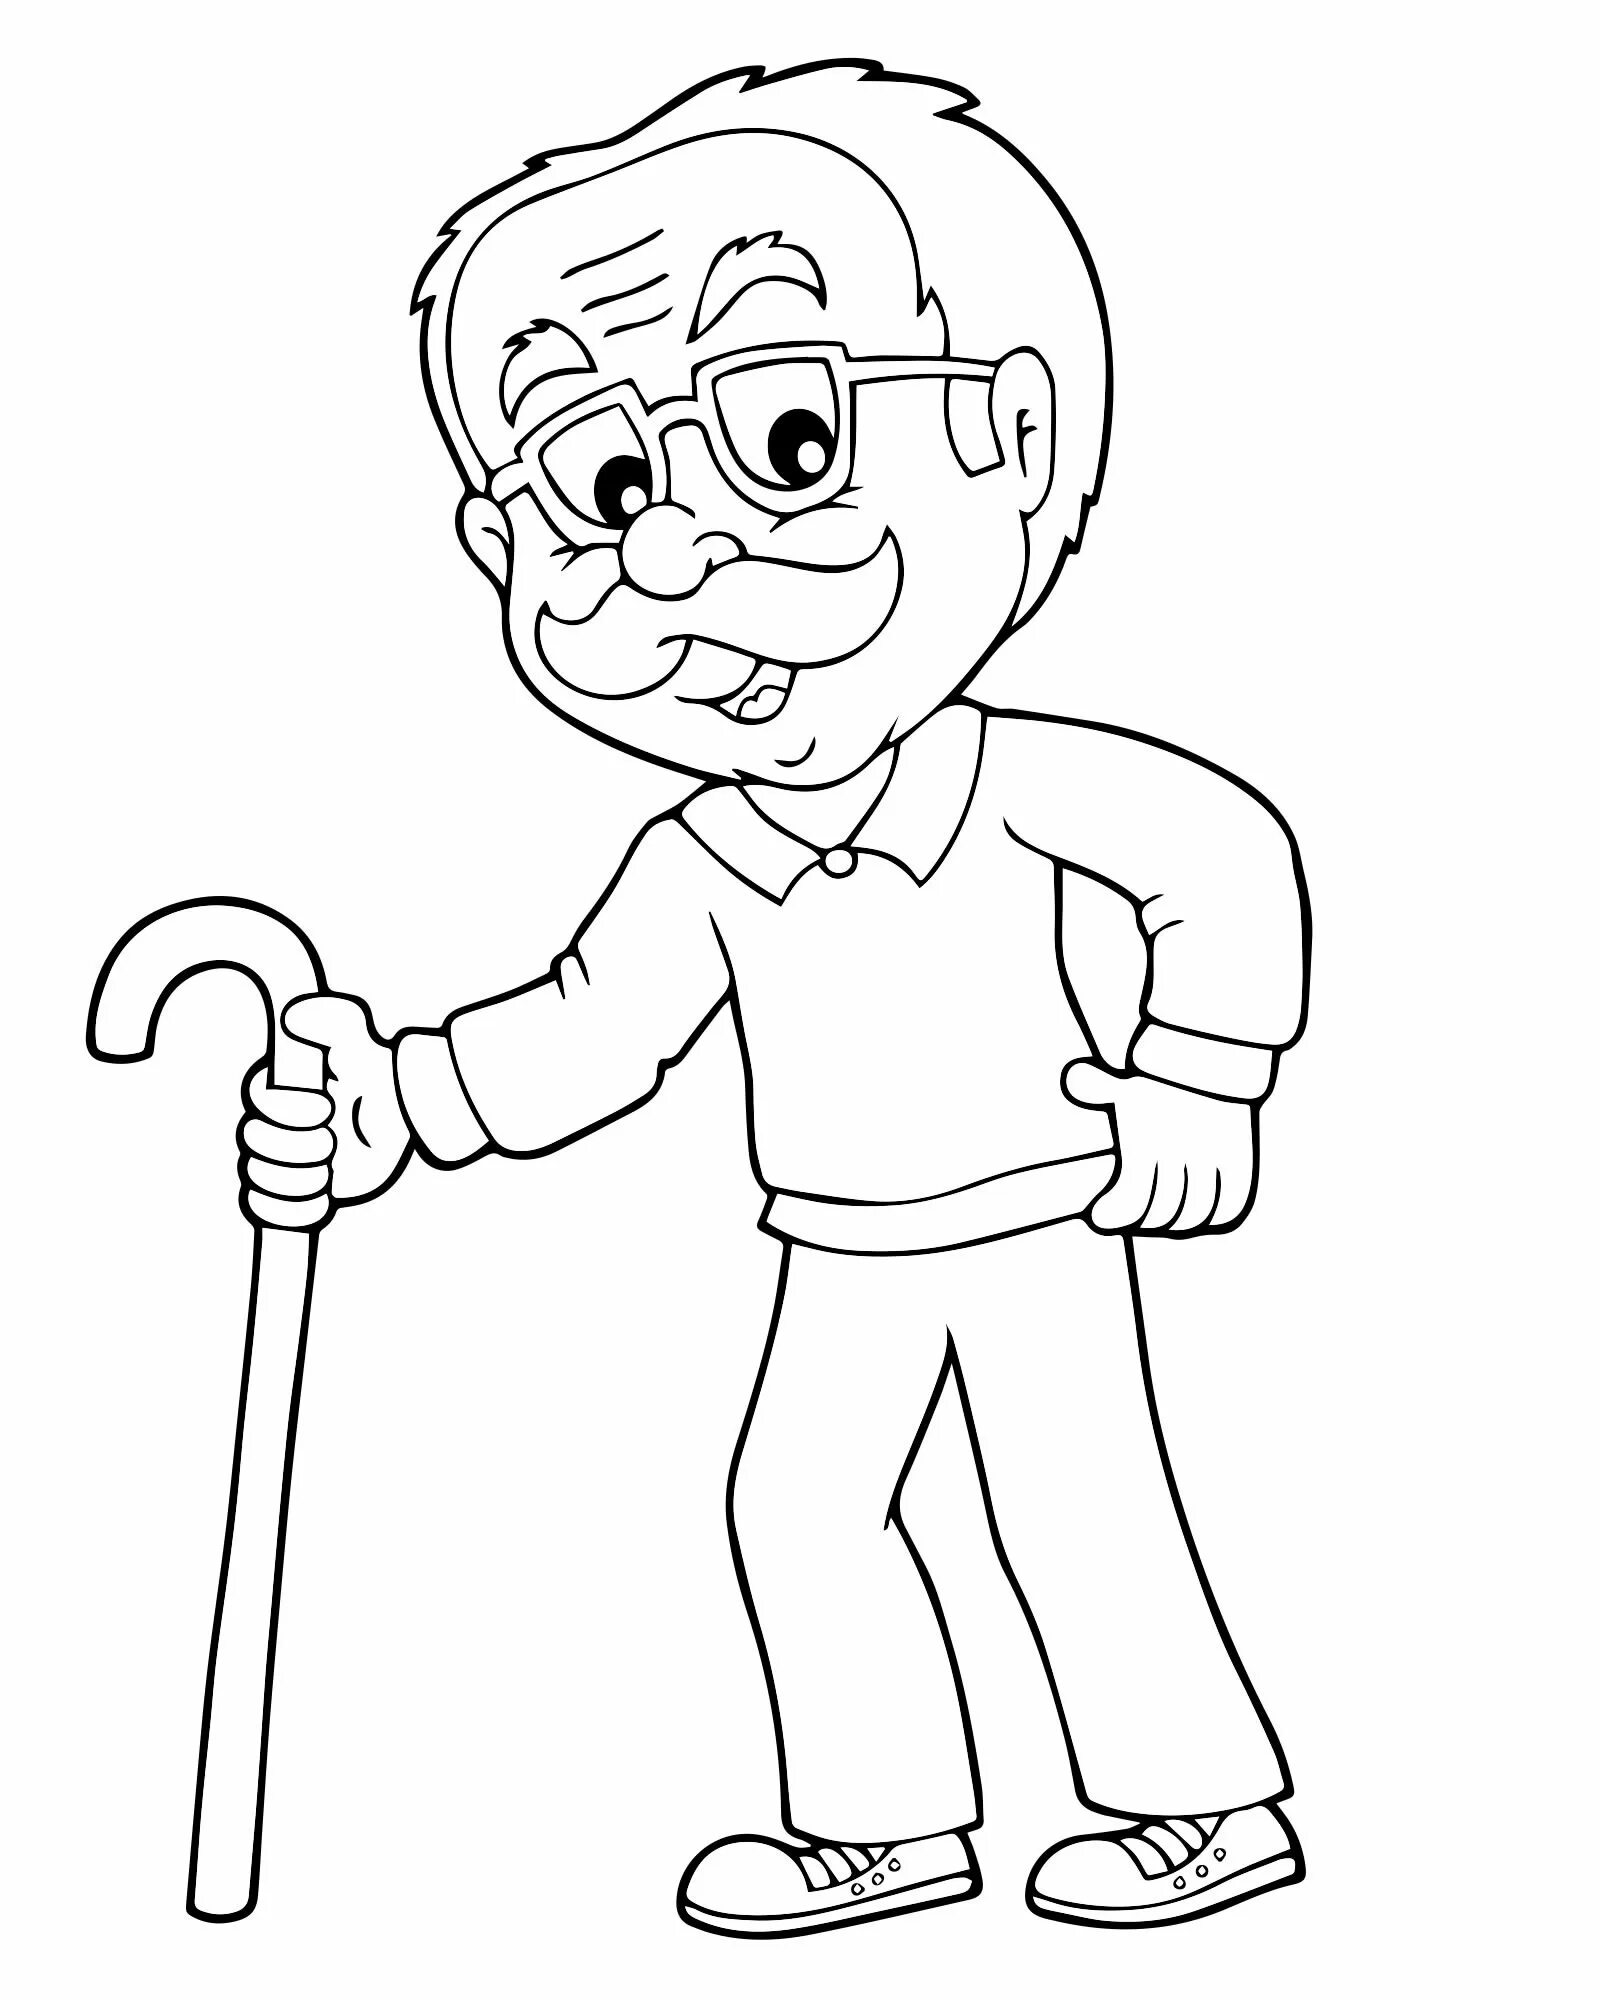 Animated grandfather coloring page